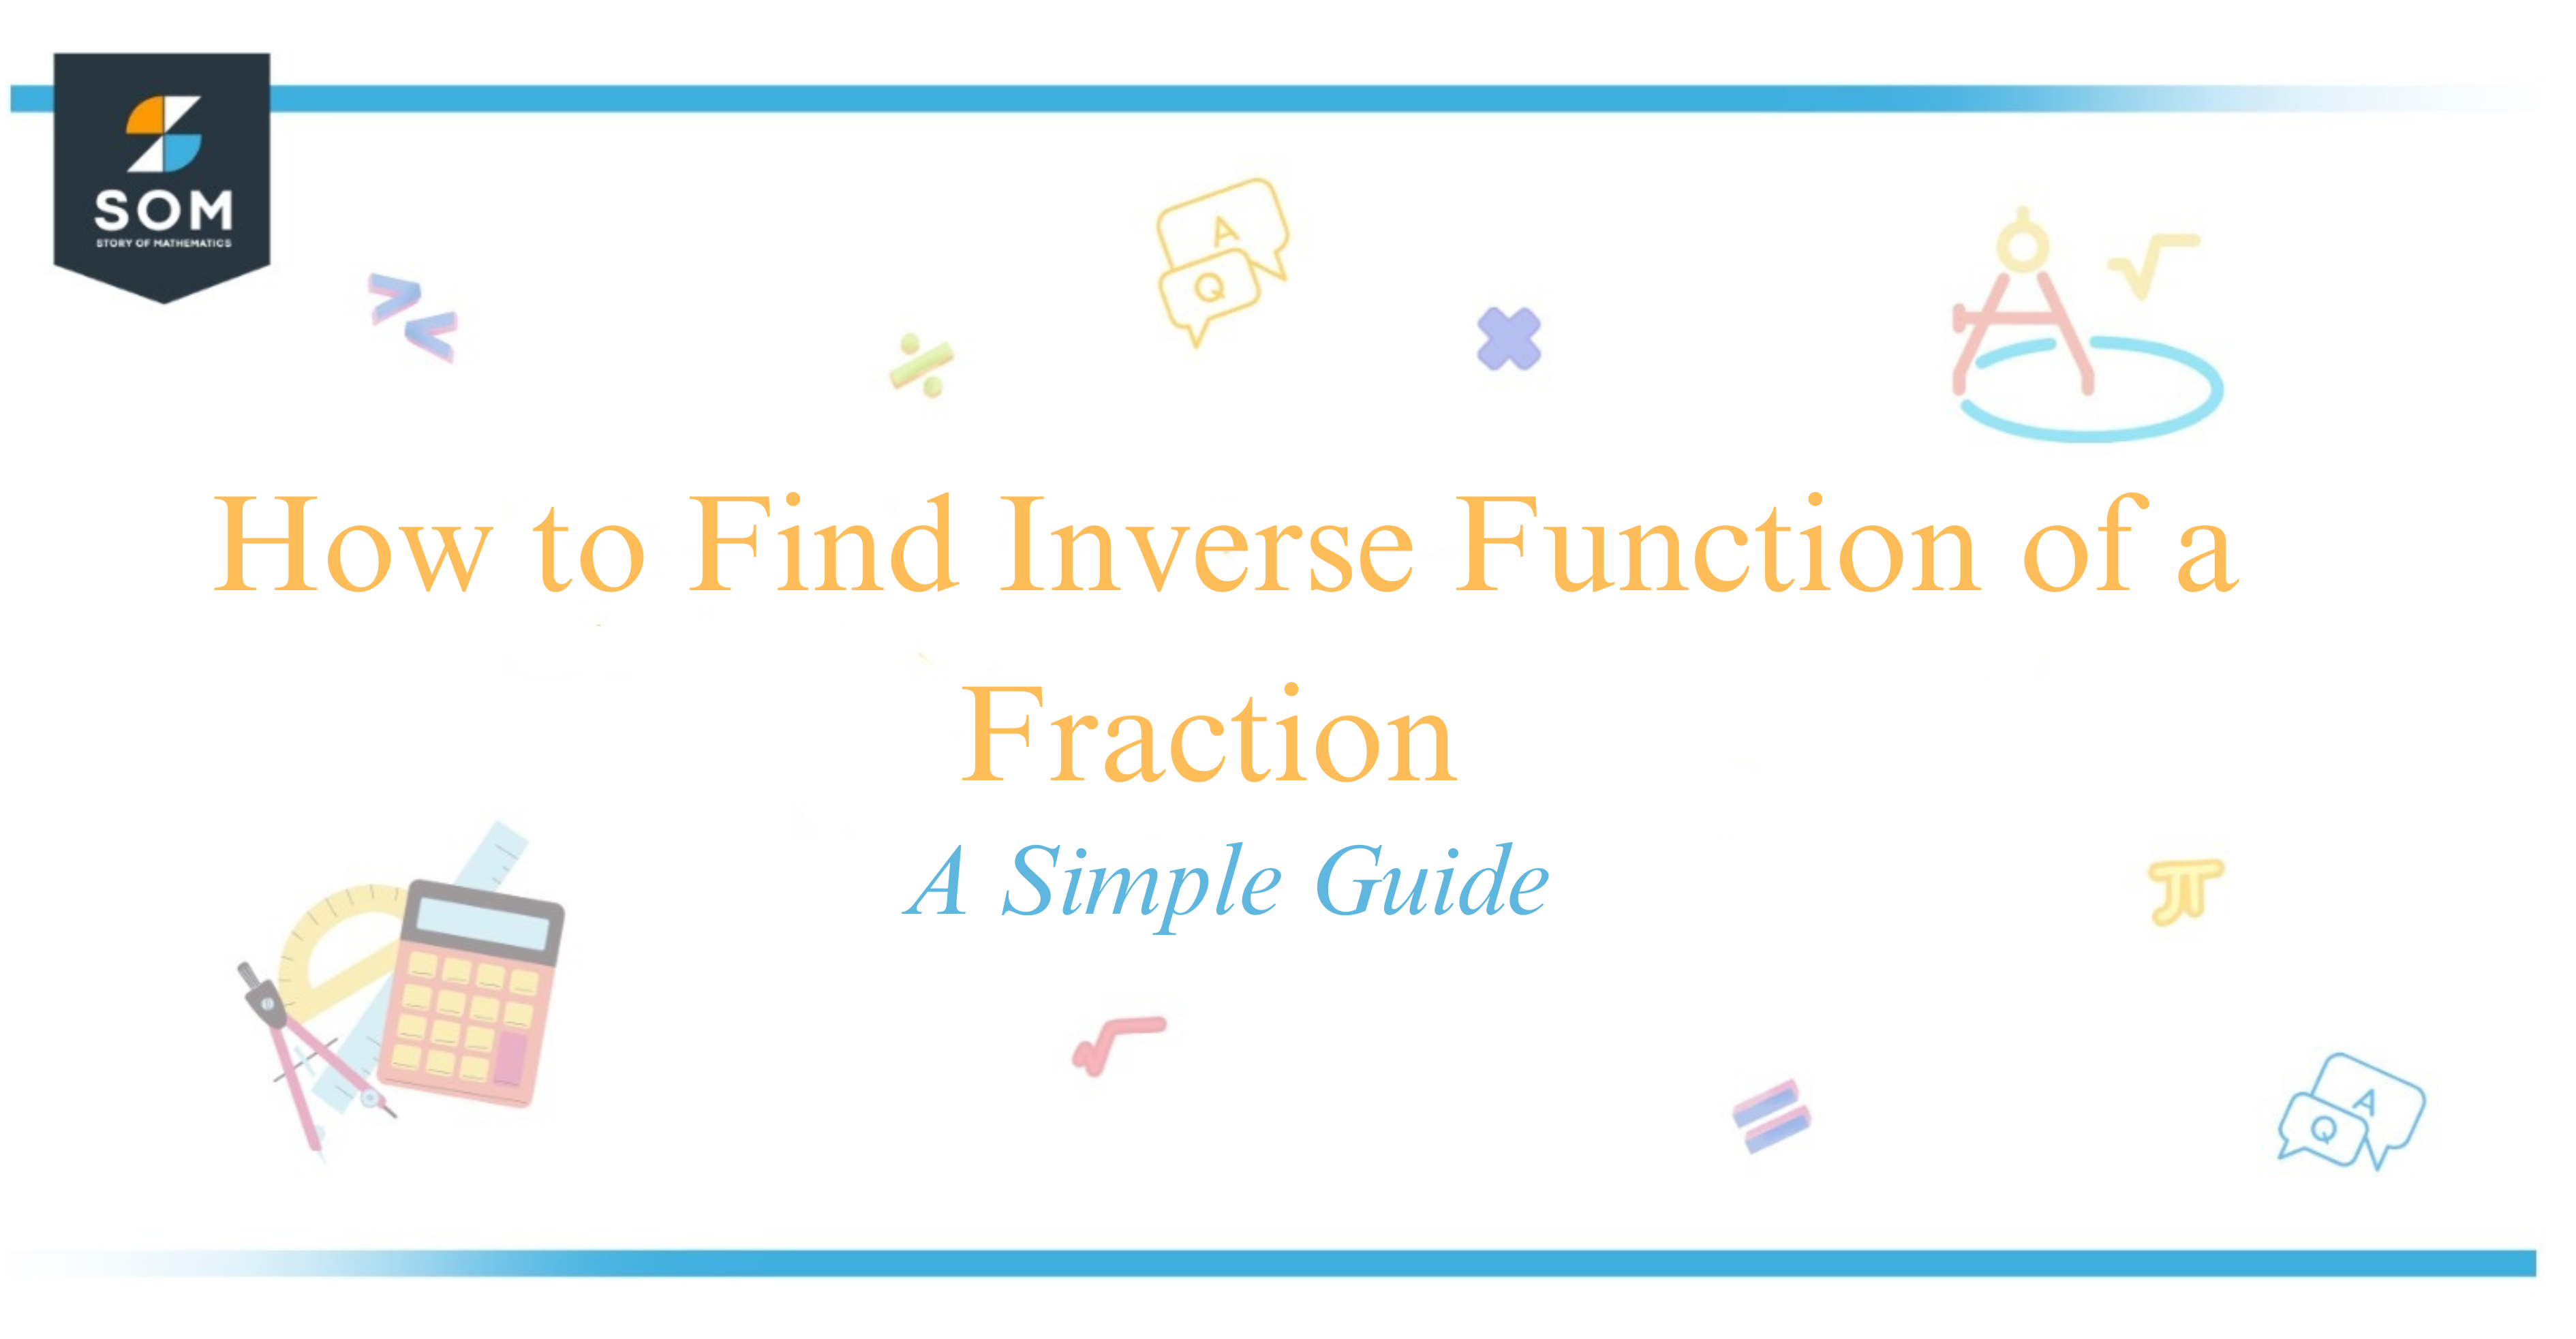 How to Find Inverse Function of a Fraction A Simple Guide